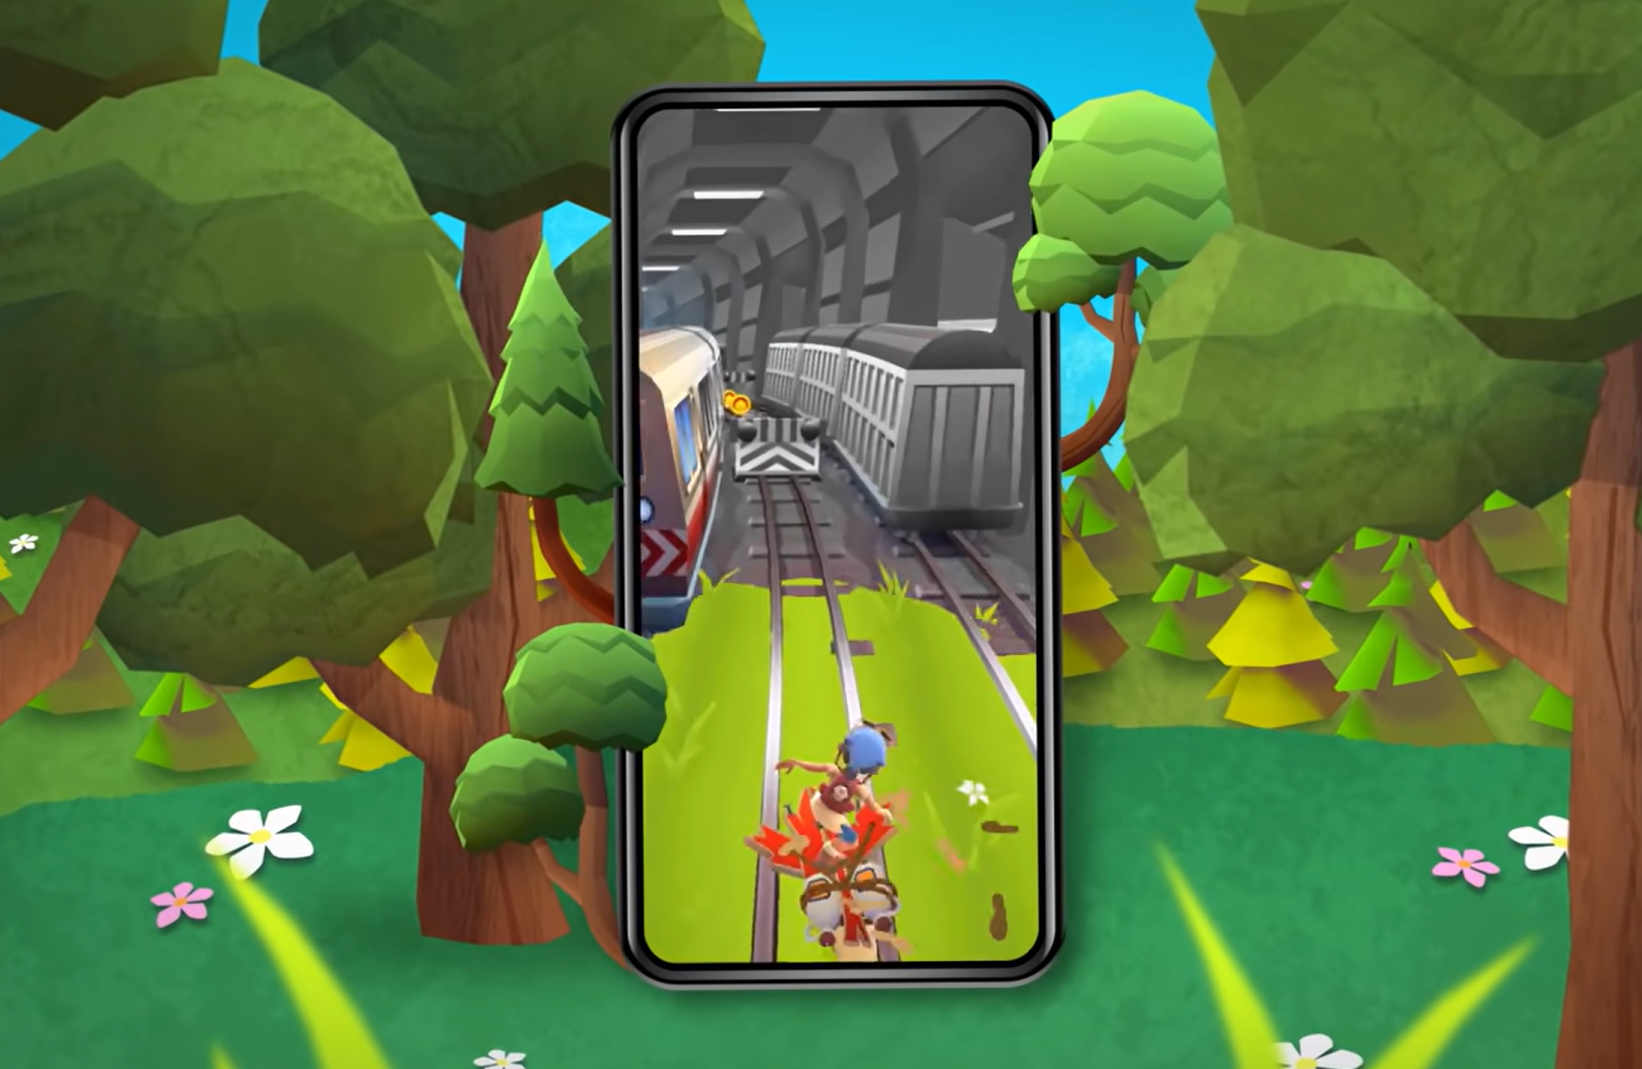 downstairs regulate peach Subway Surfers moblie game features new Vancouver map - Vancouver Is Awesome